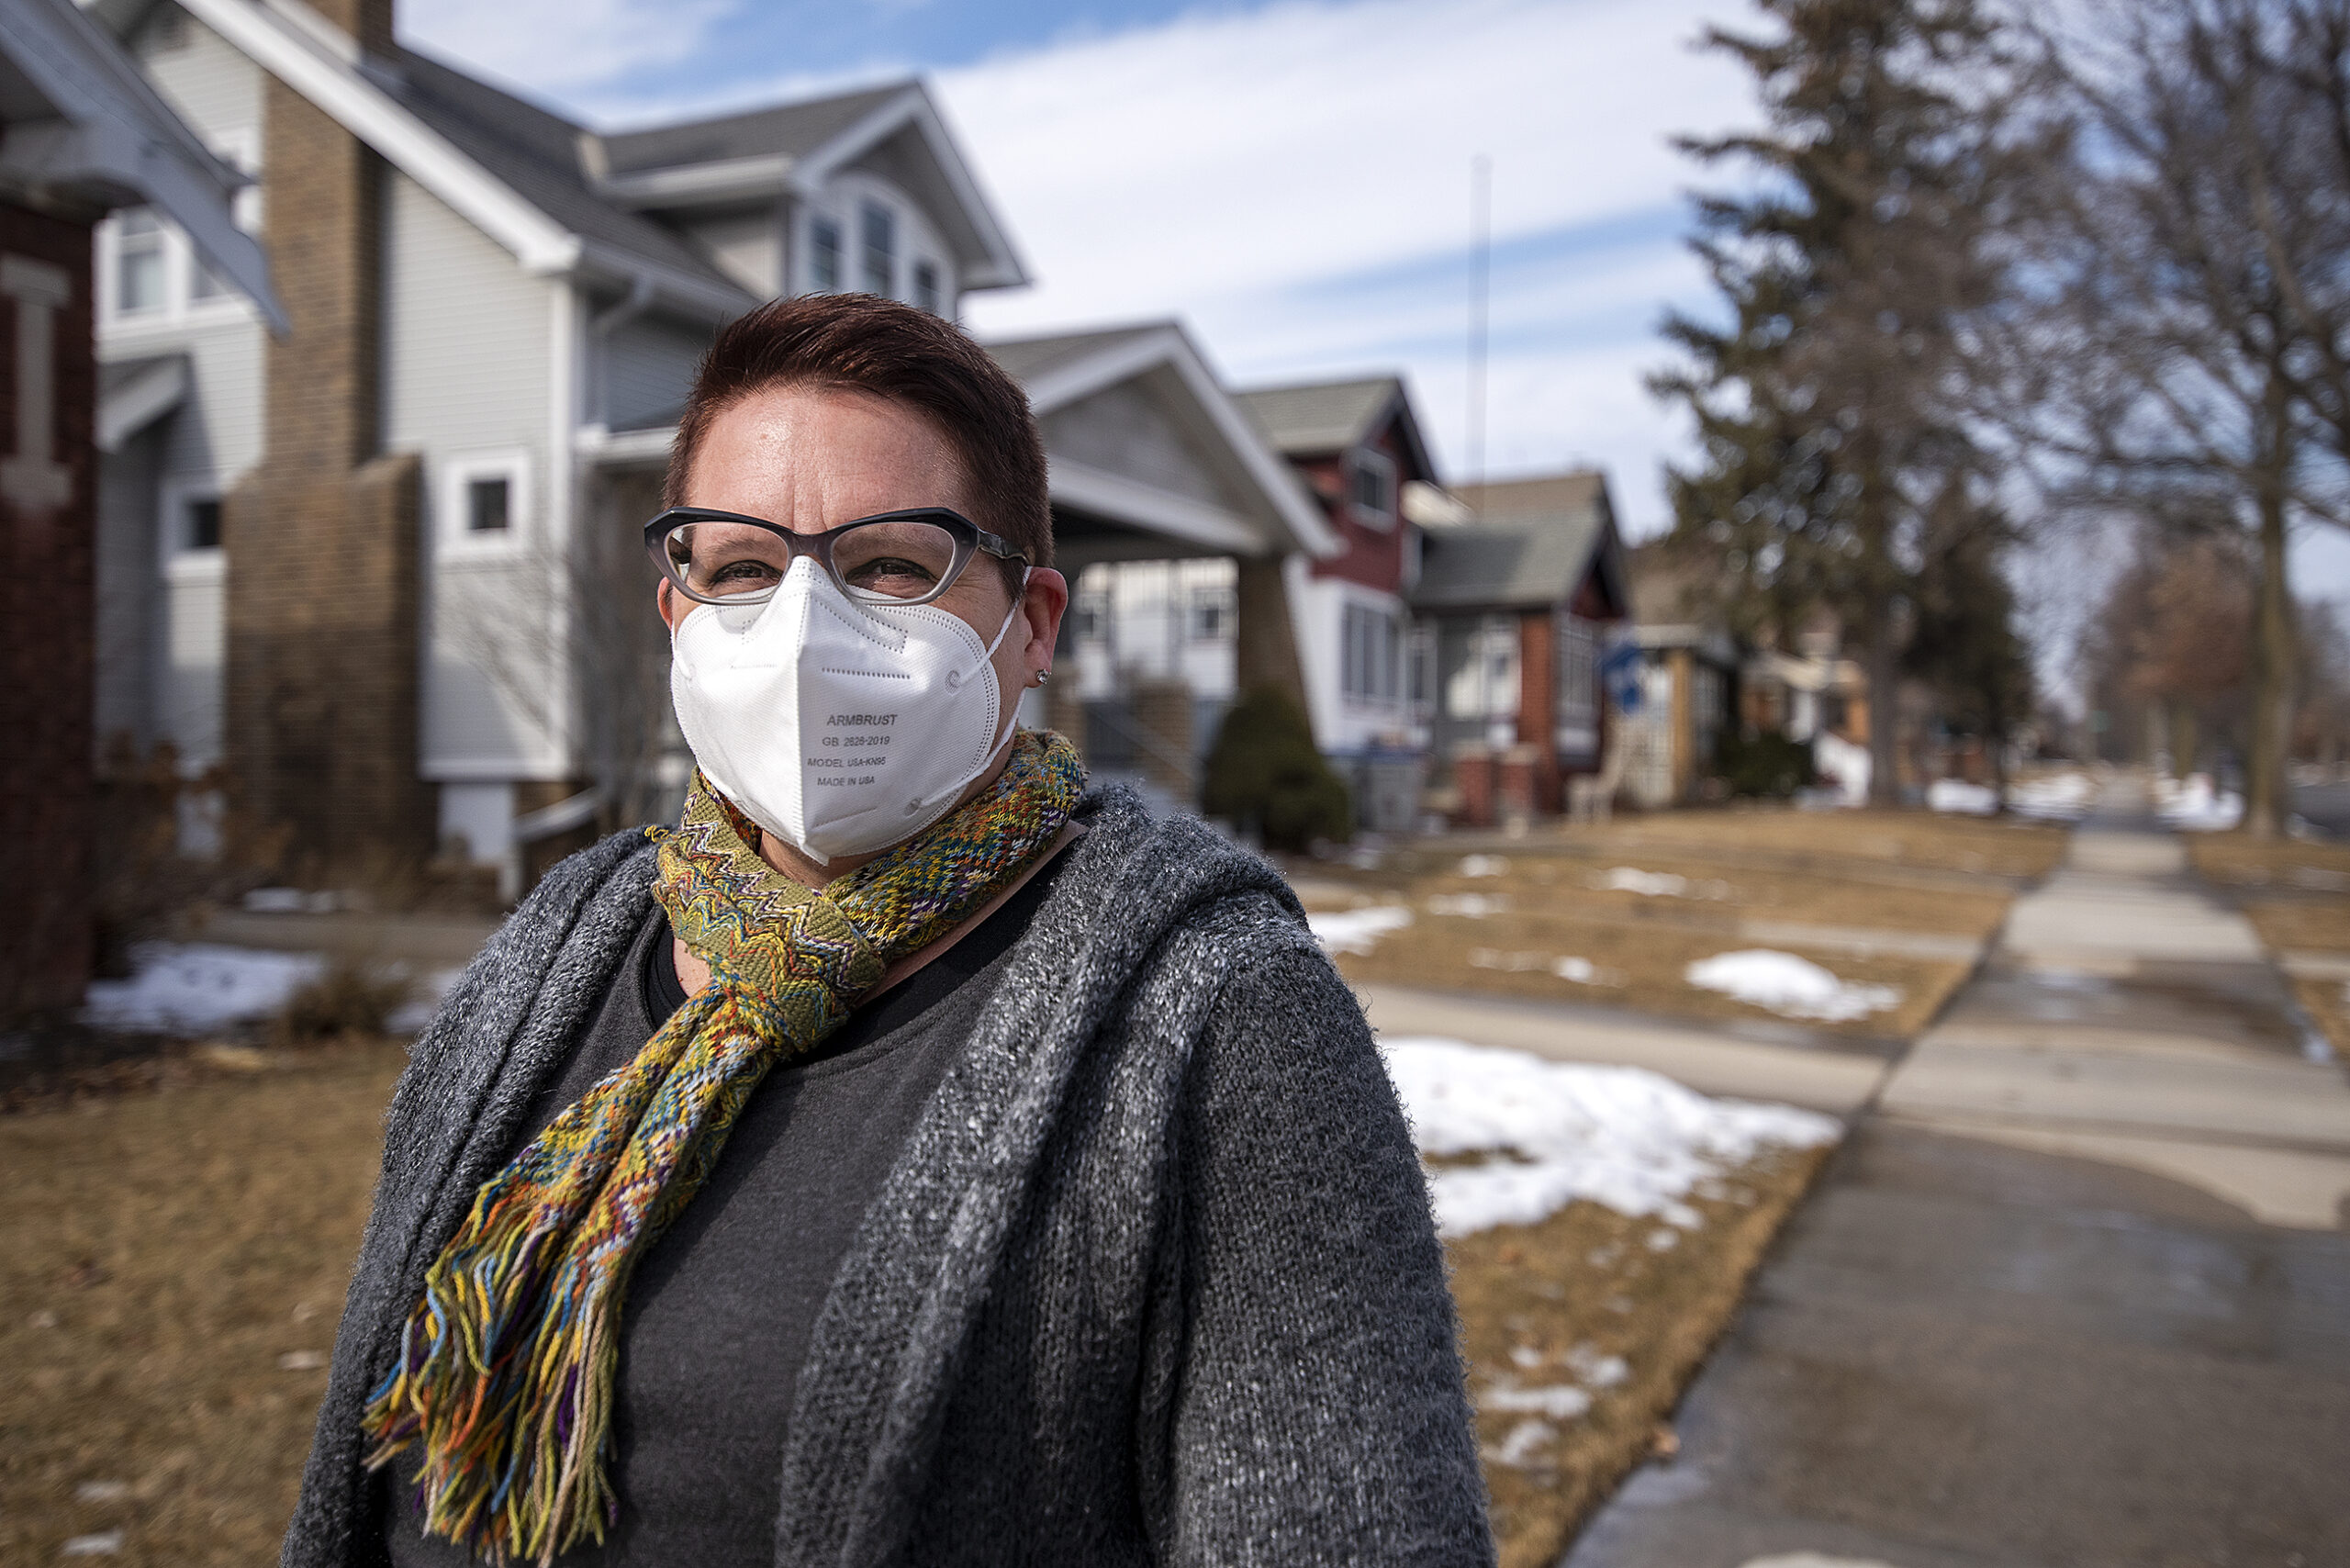 A woman stands near a row of homes outside wearing a white face mask.